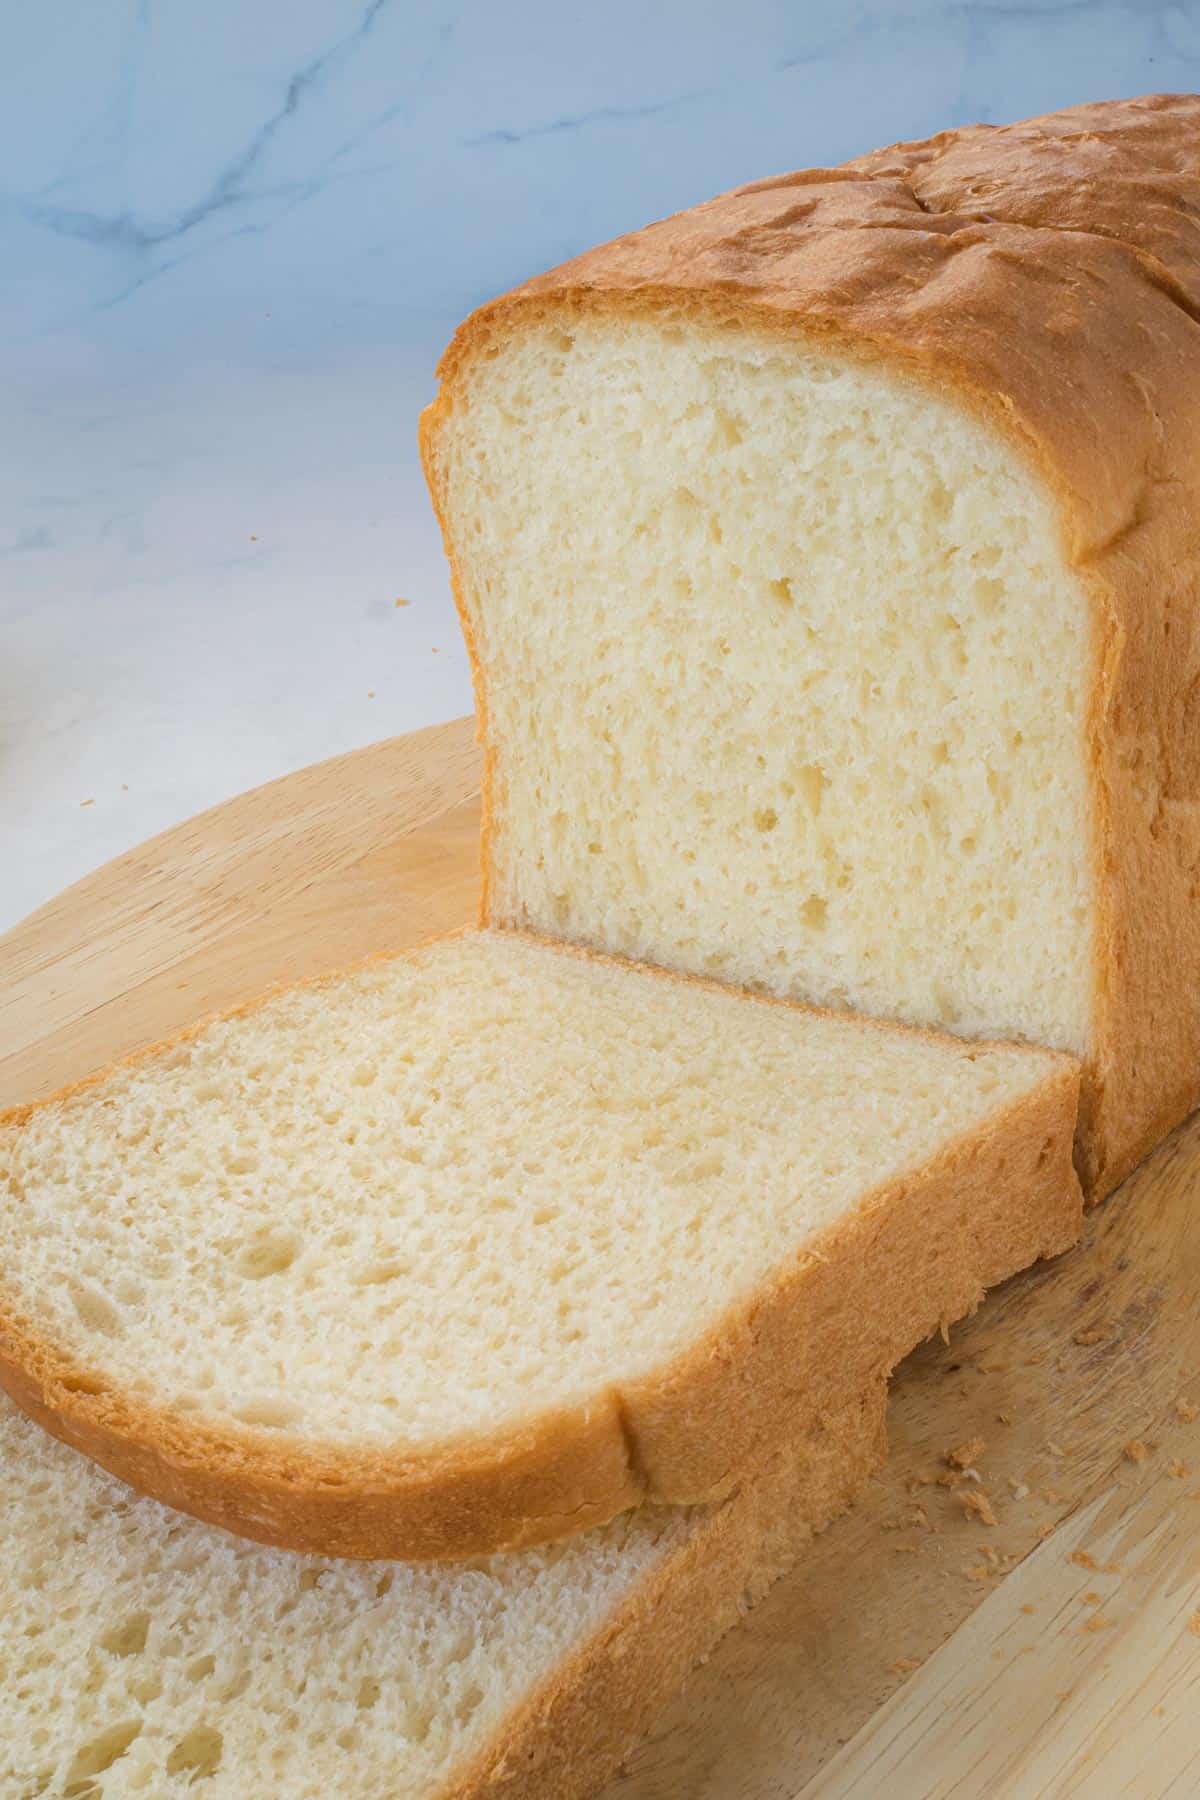 A loaf bread with slice cut out.